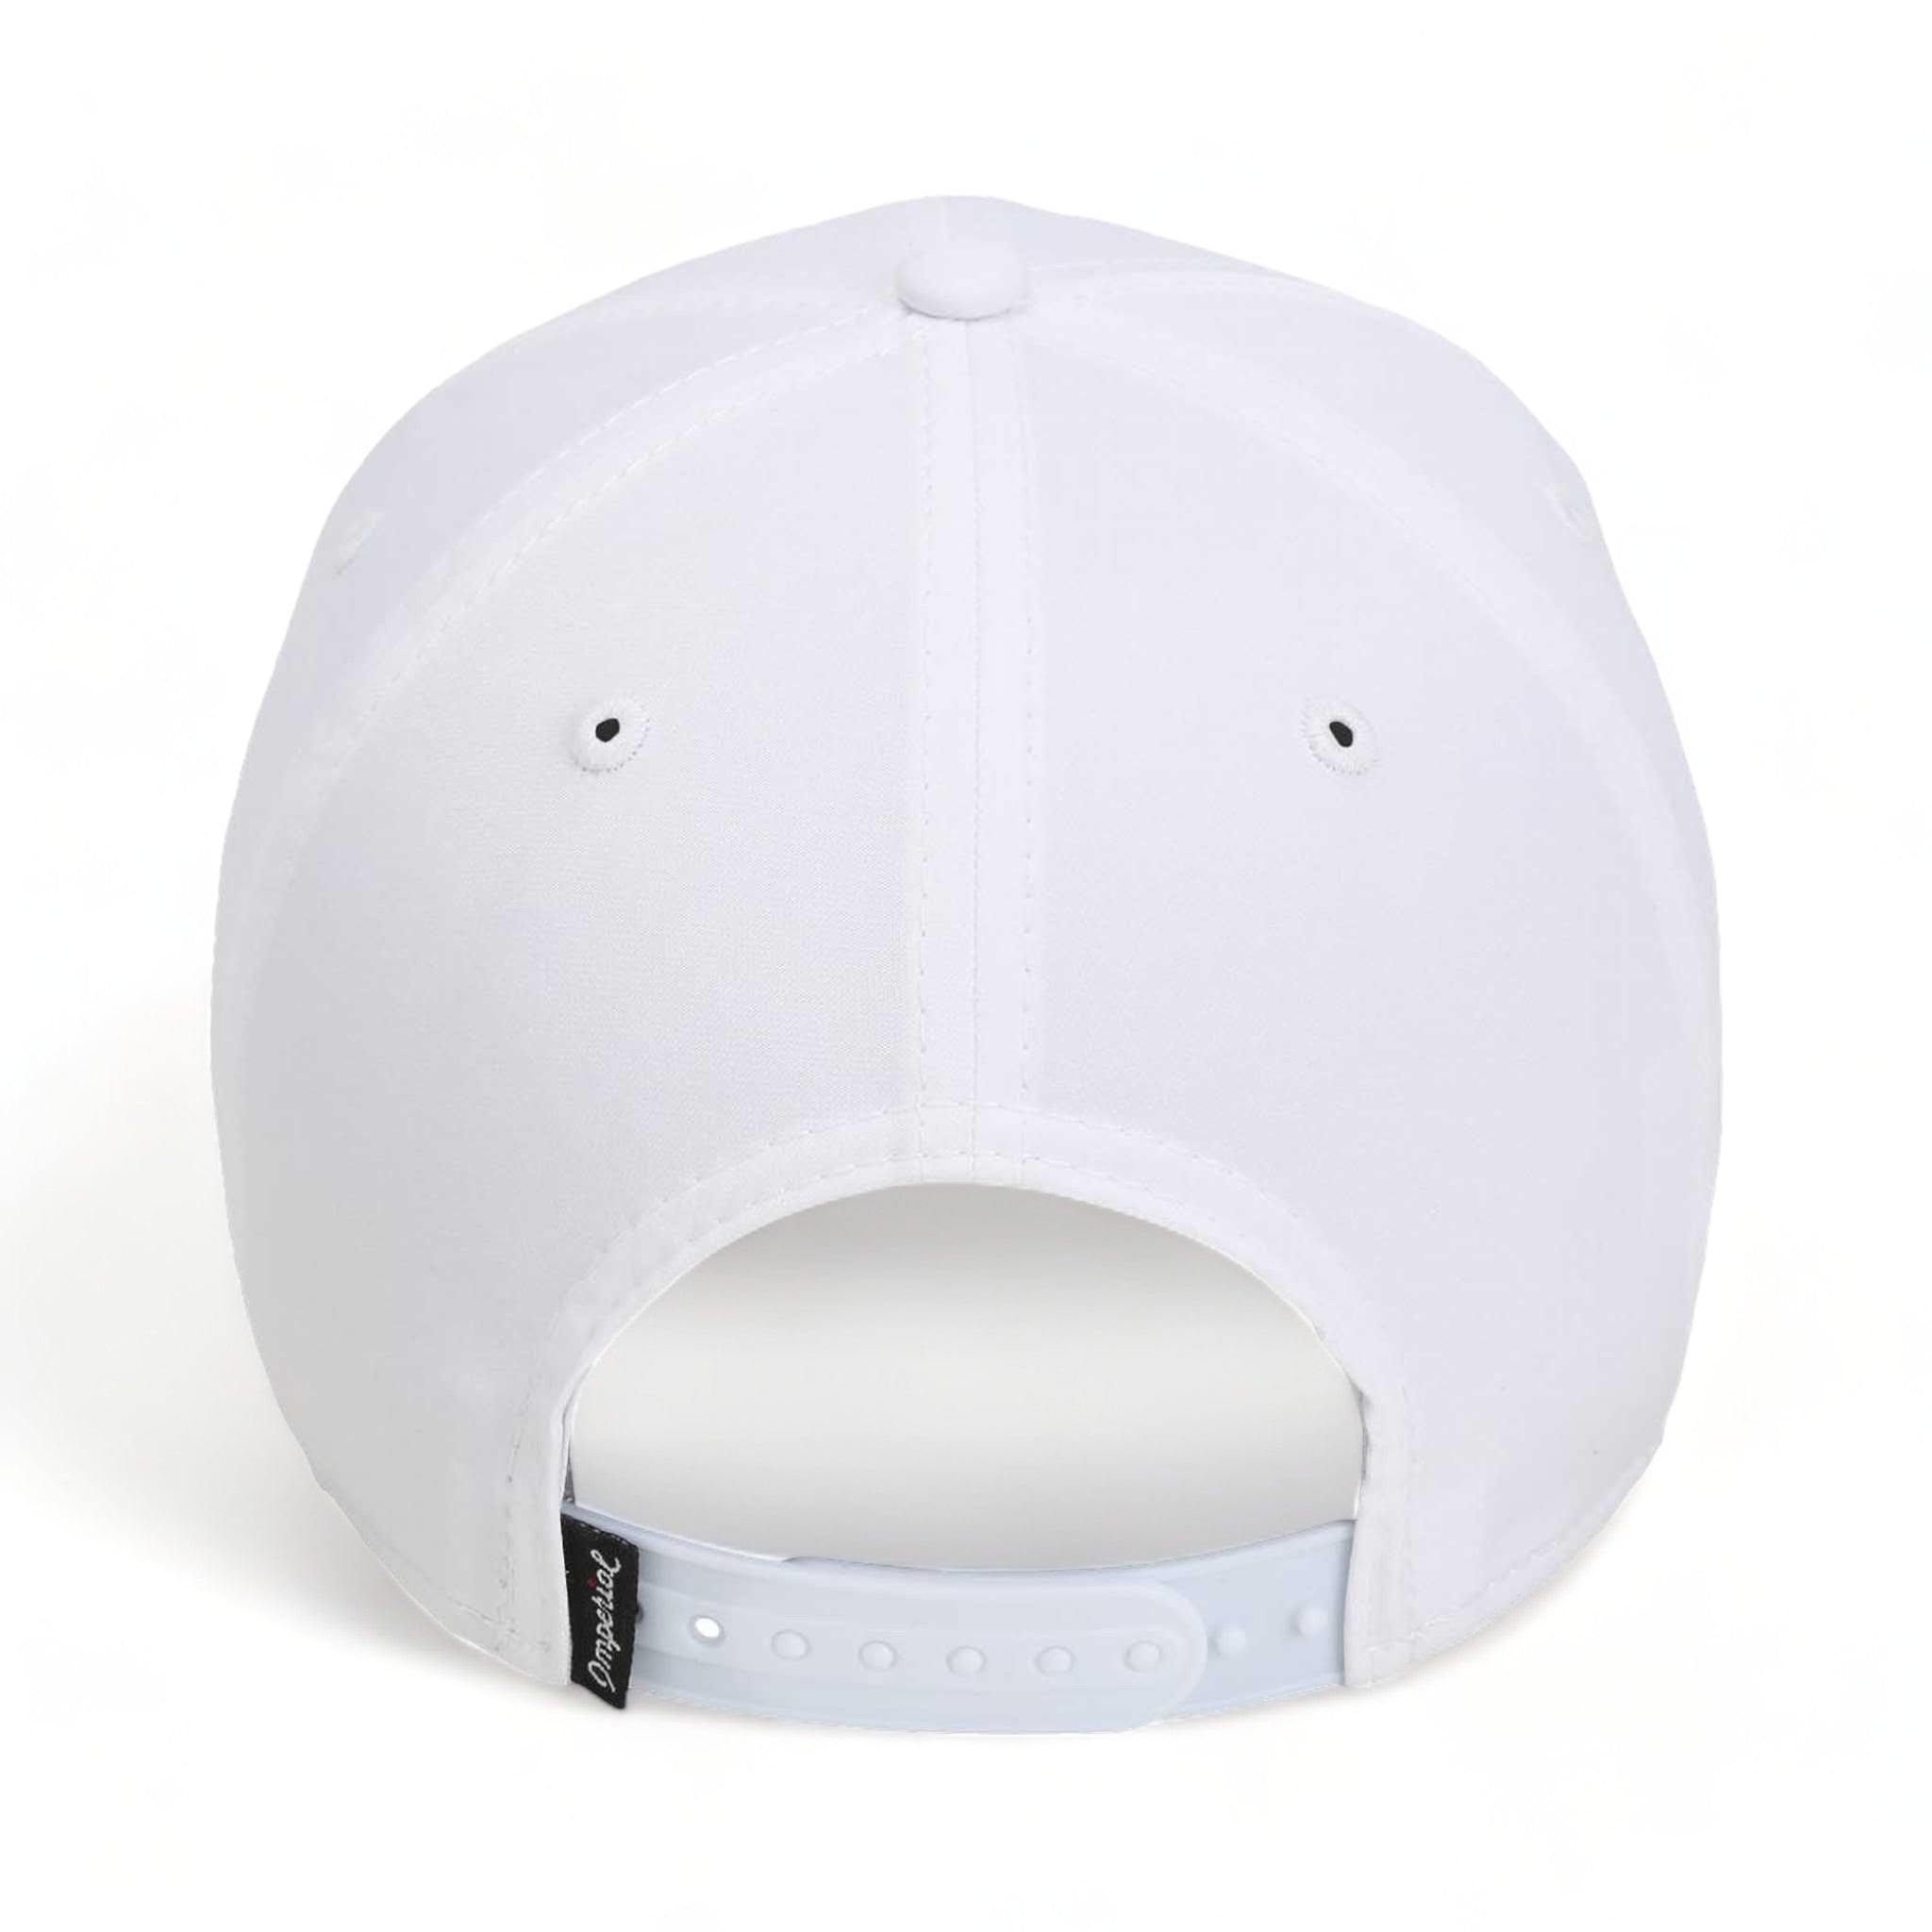 Back view of Imperial 7054 custom hat in white and black